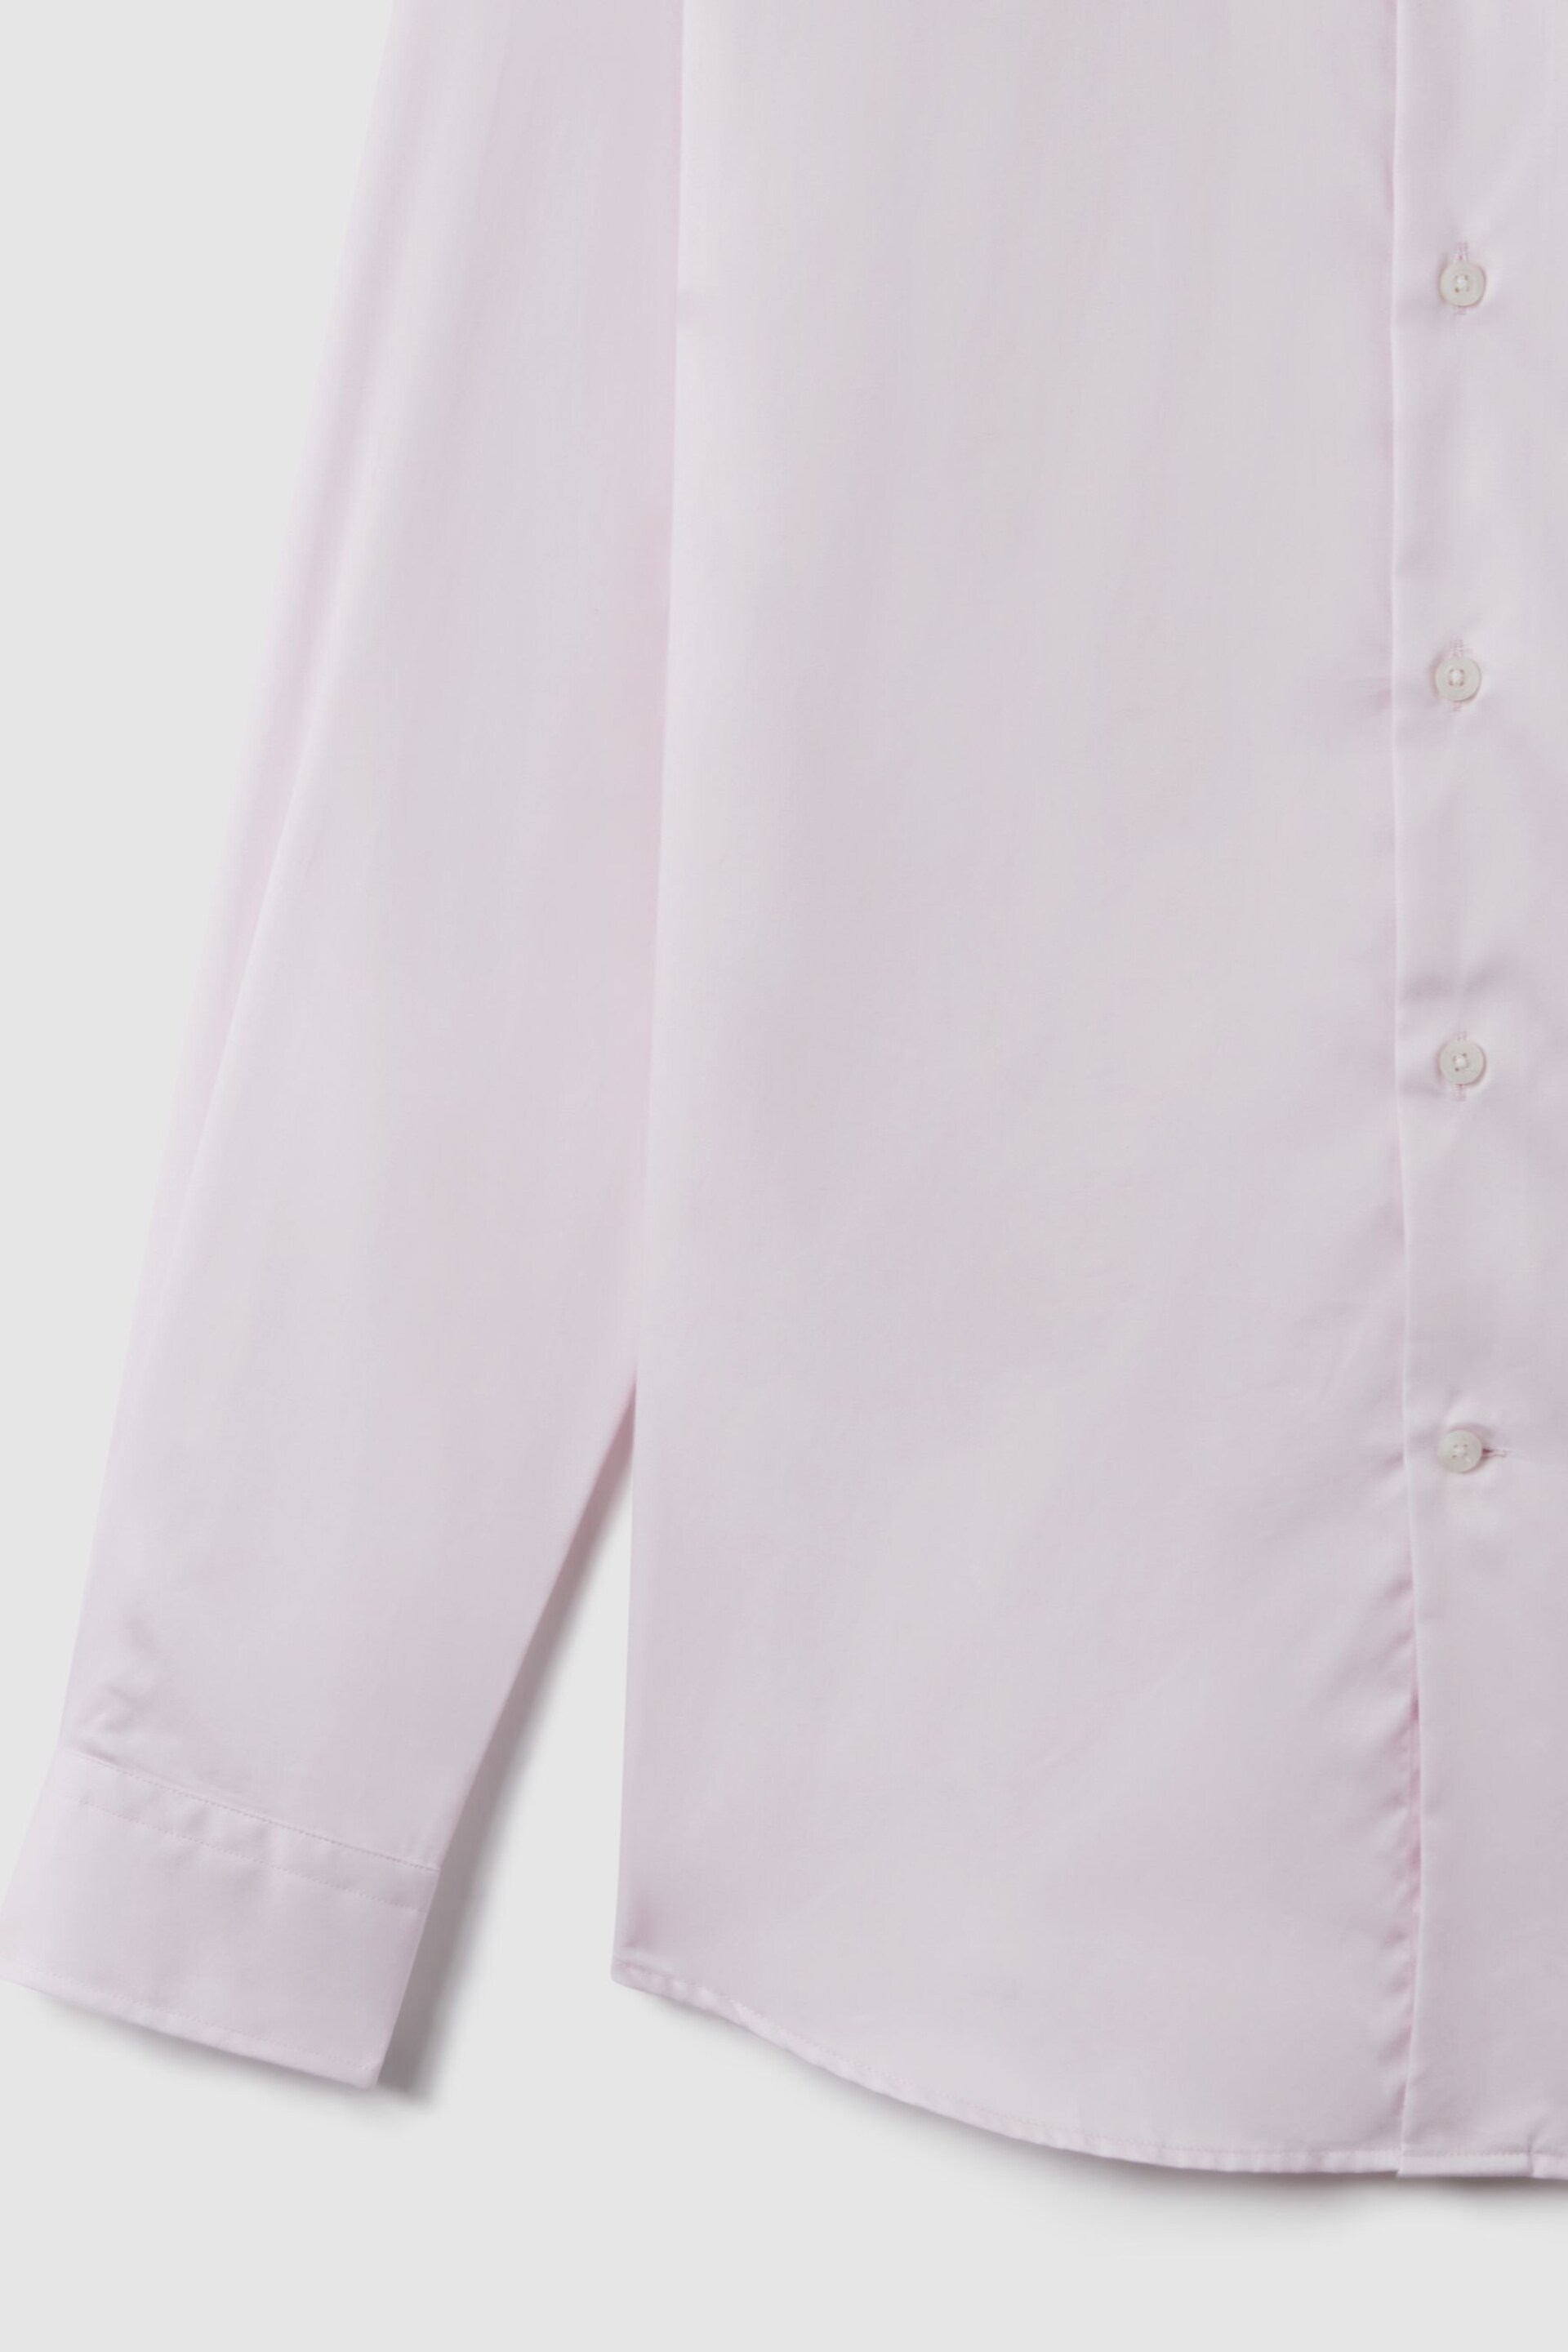 Reiss Pink Remote Slim Fit Cotton Sateen Shirt - Image 6 of 6